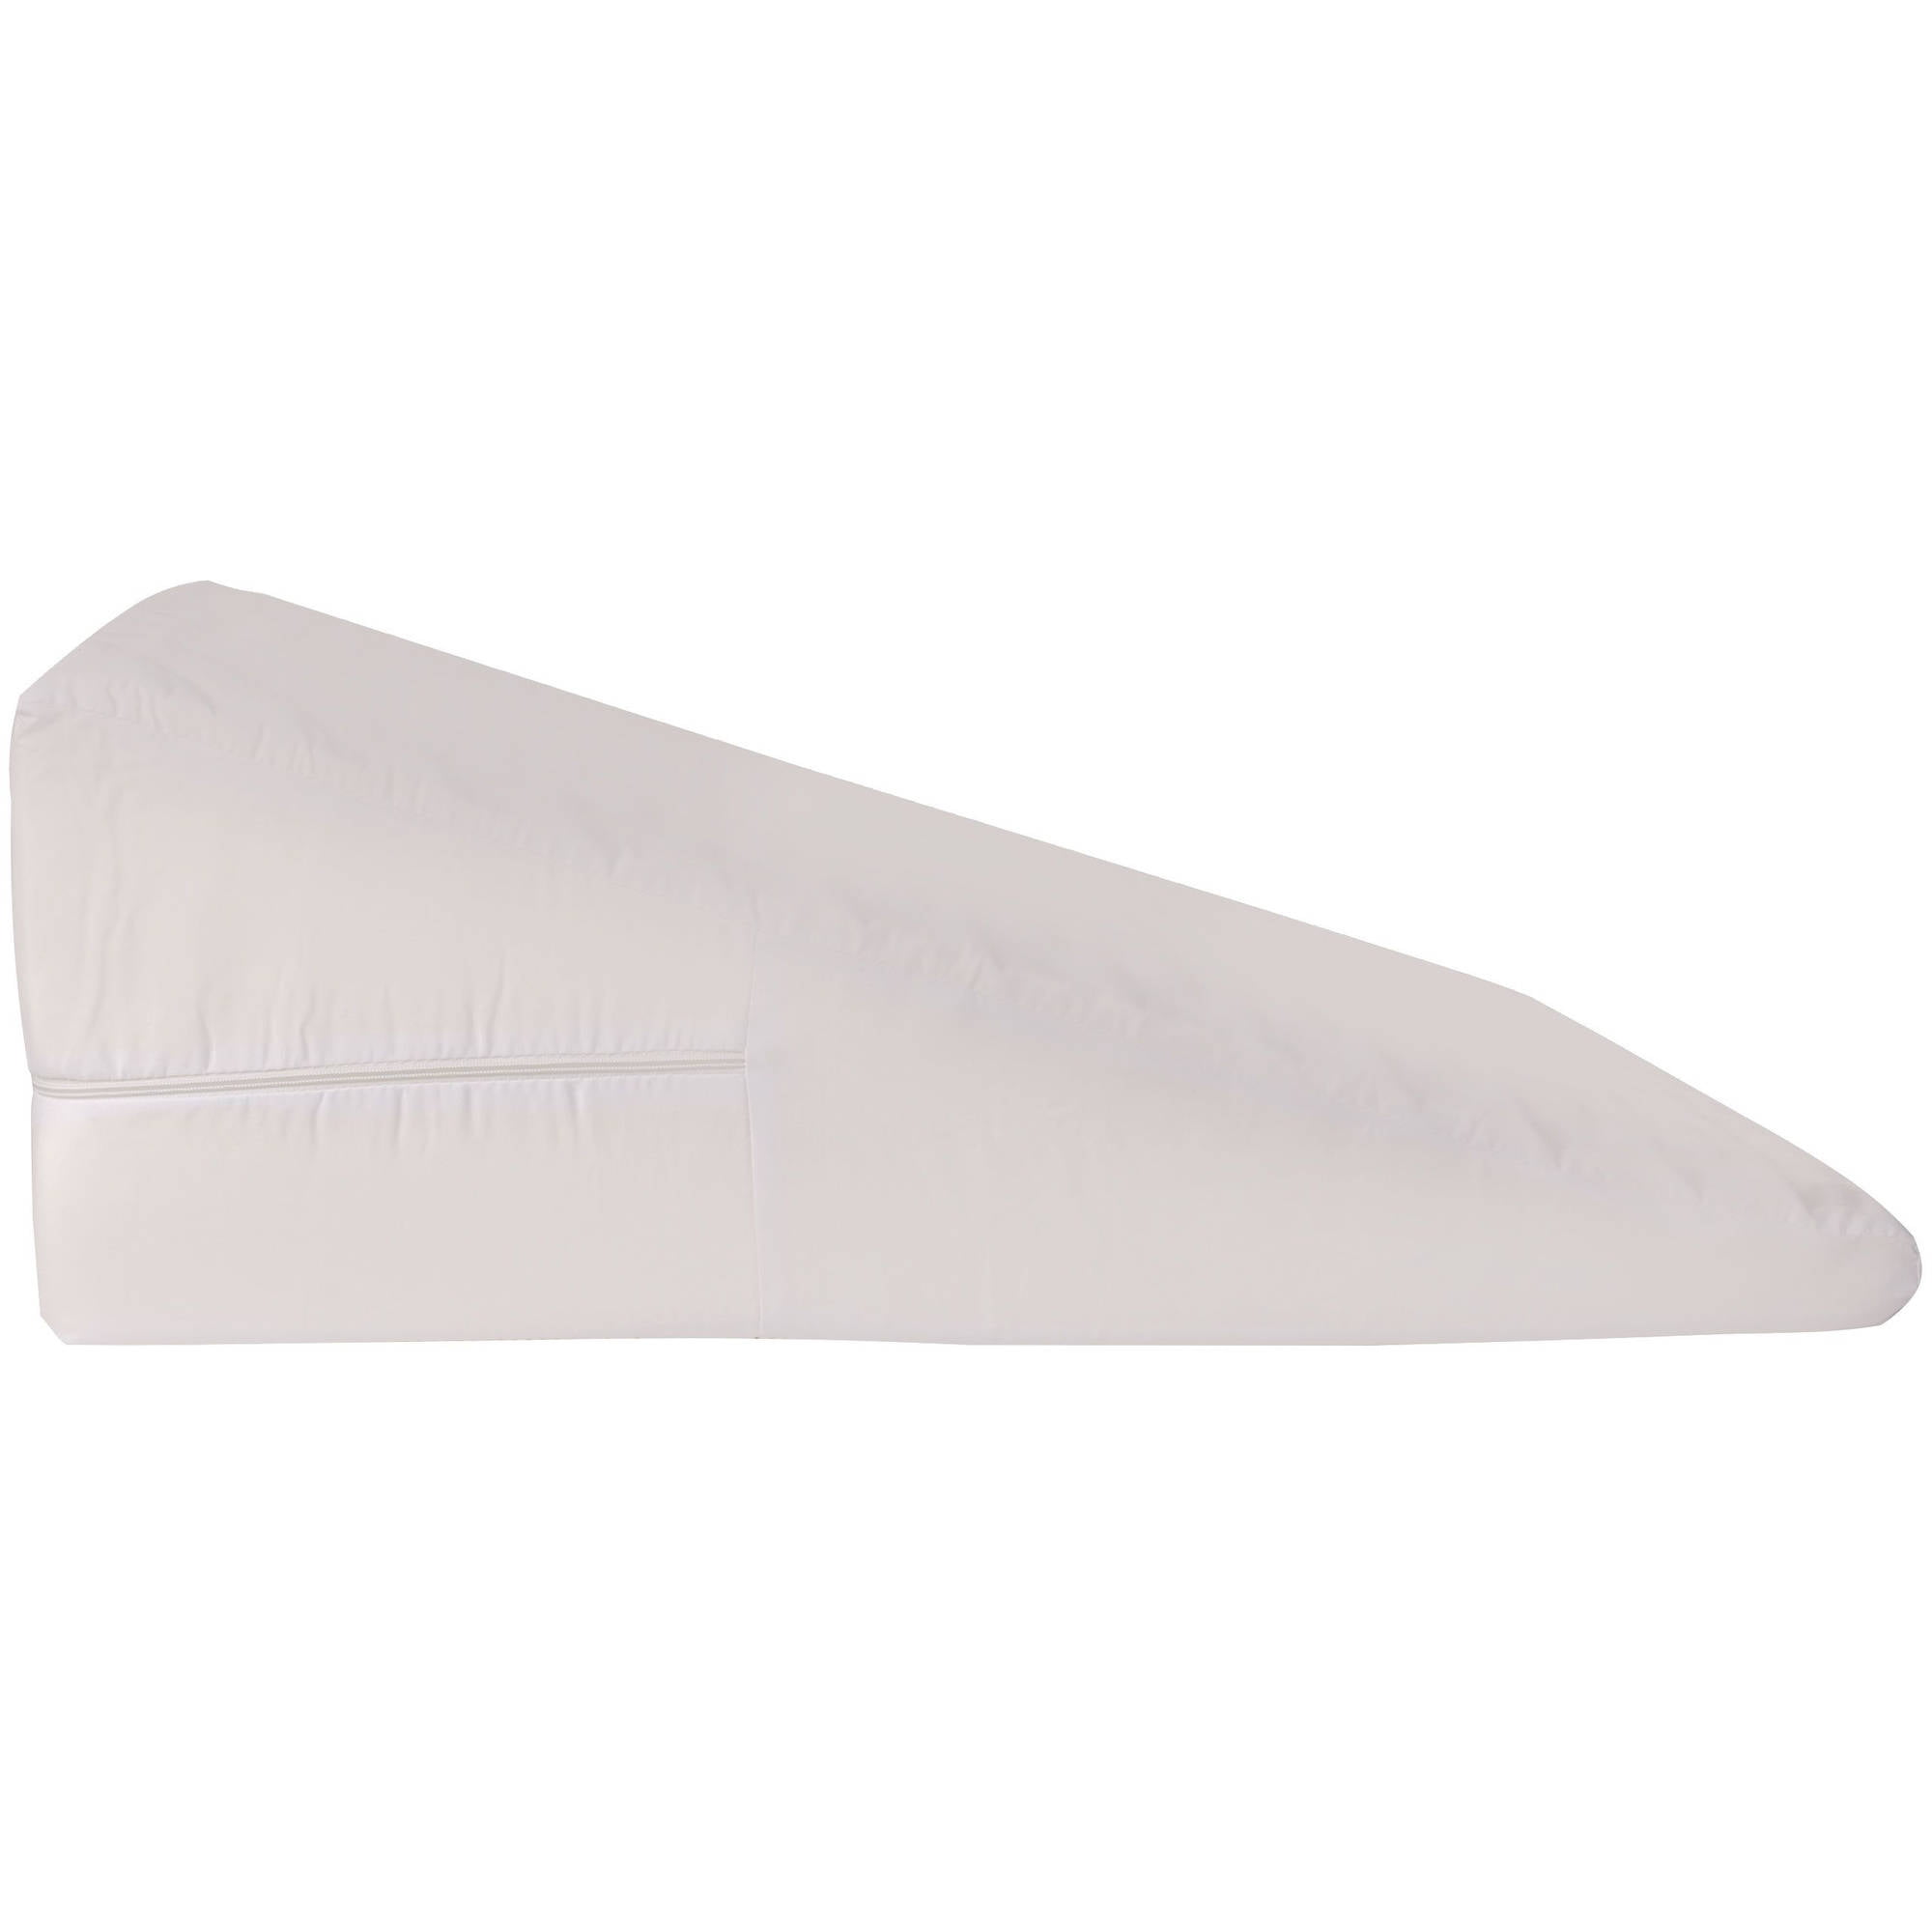 DMI Supportive Foam Wedge Pillow, White, Small